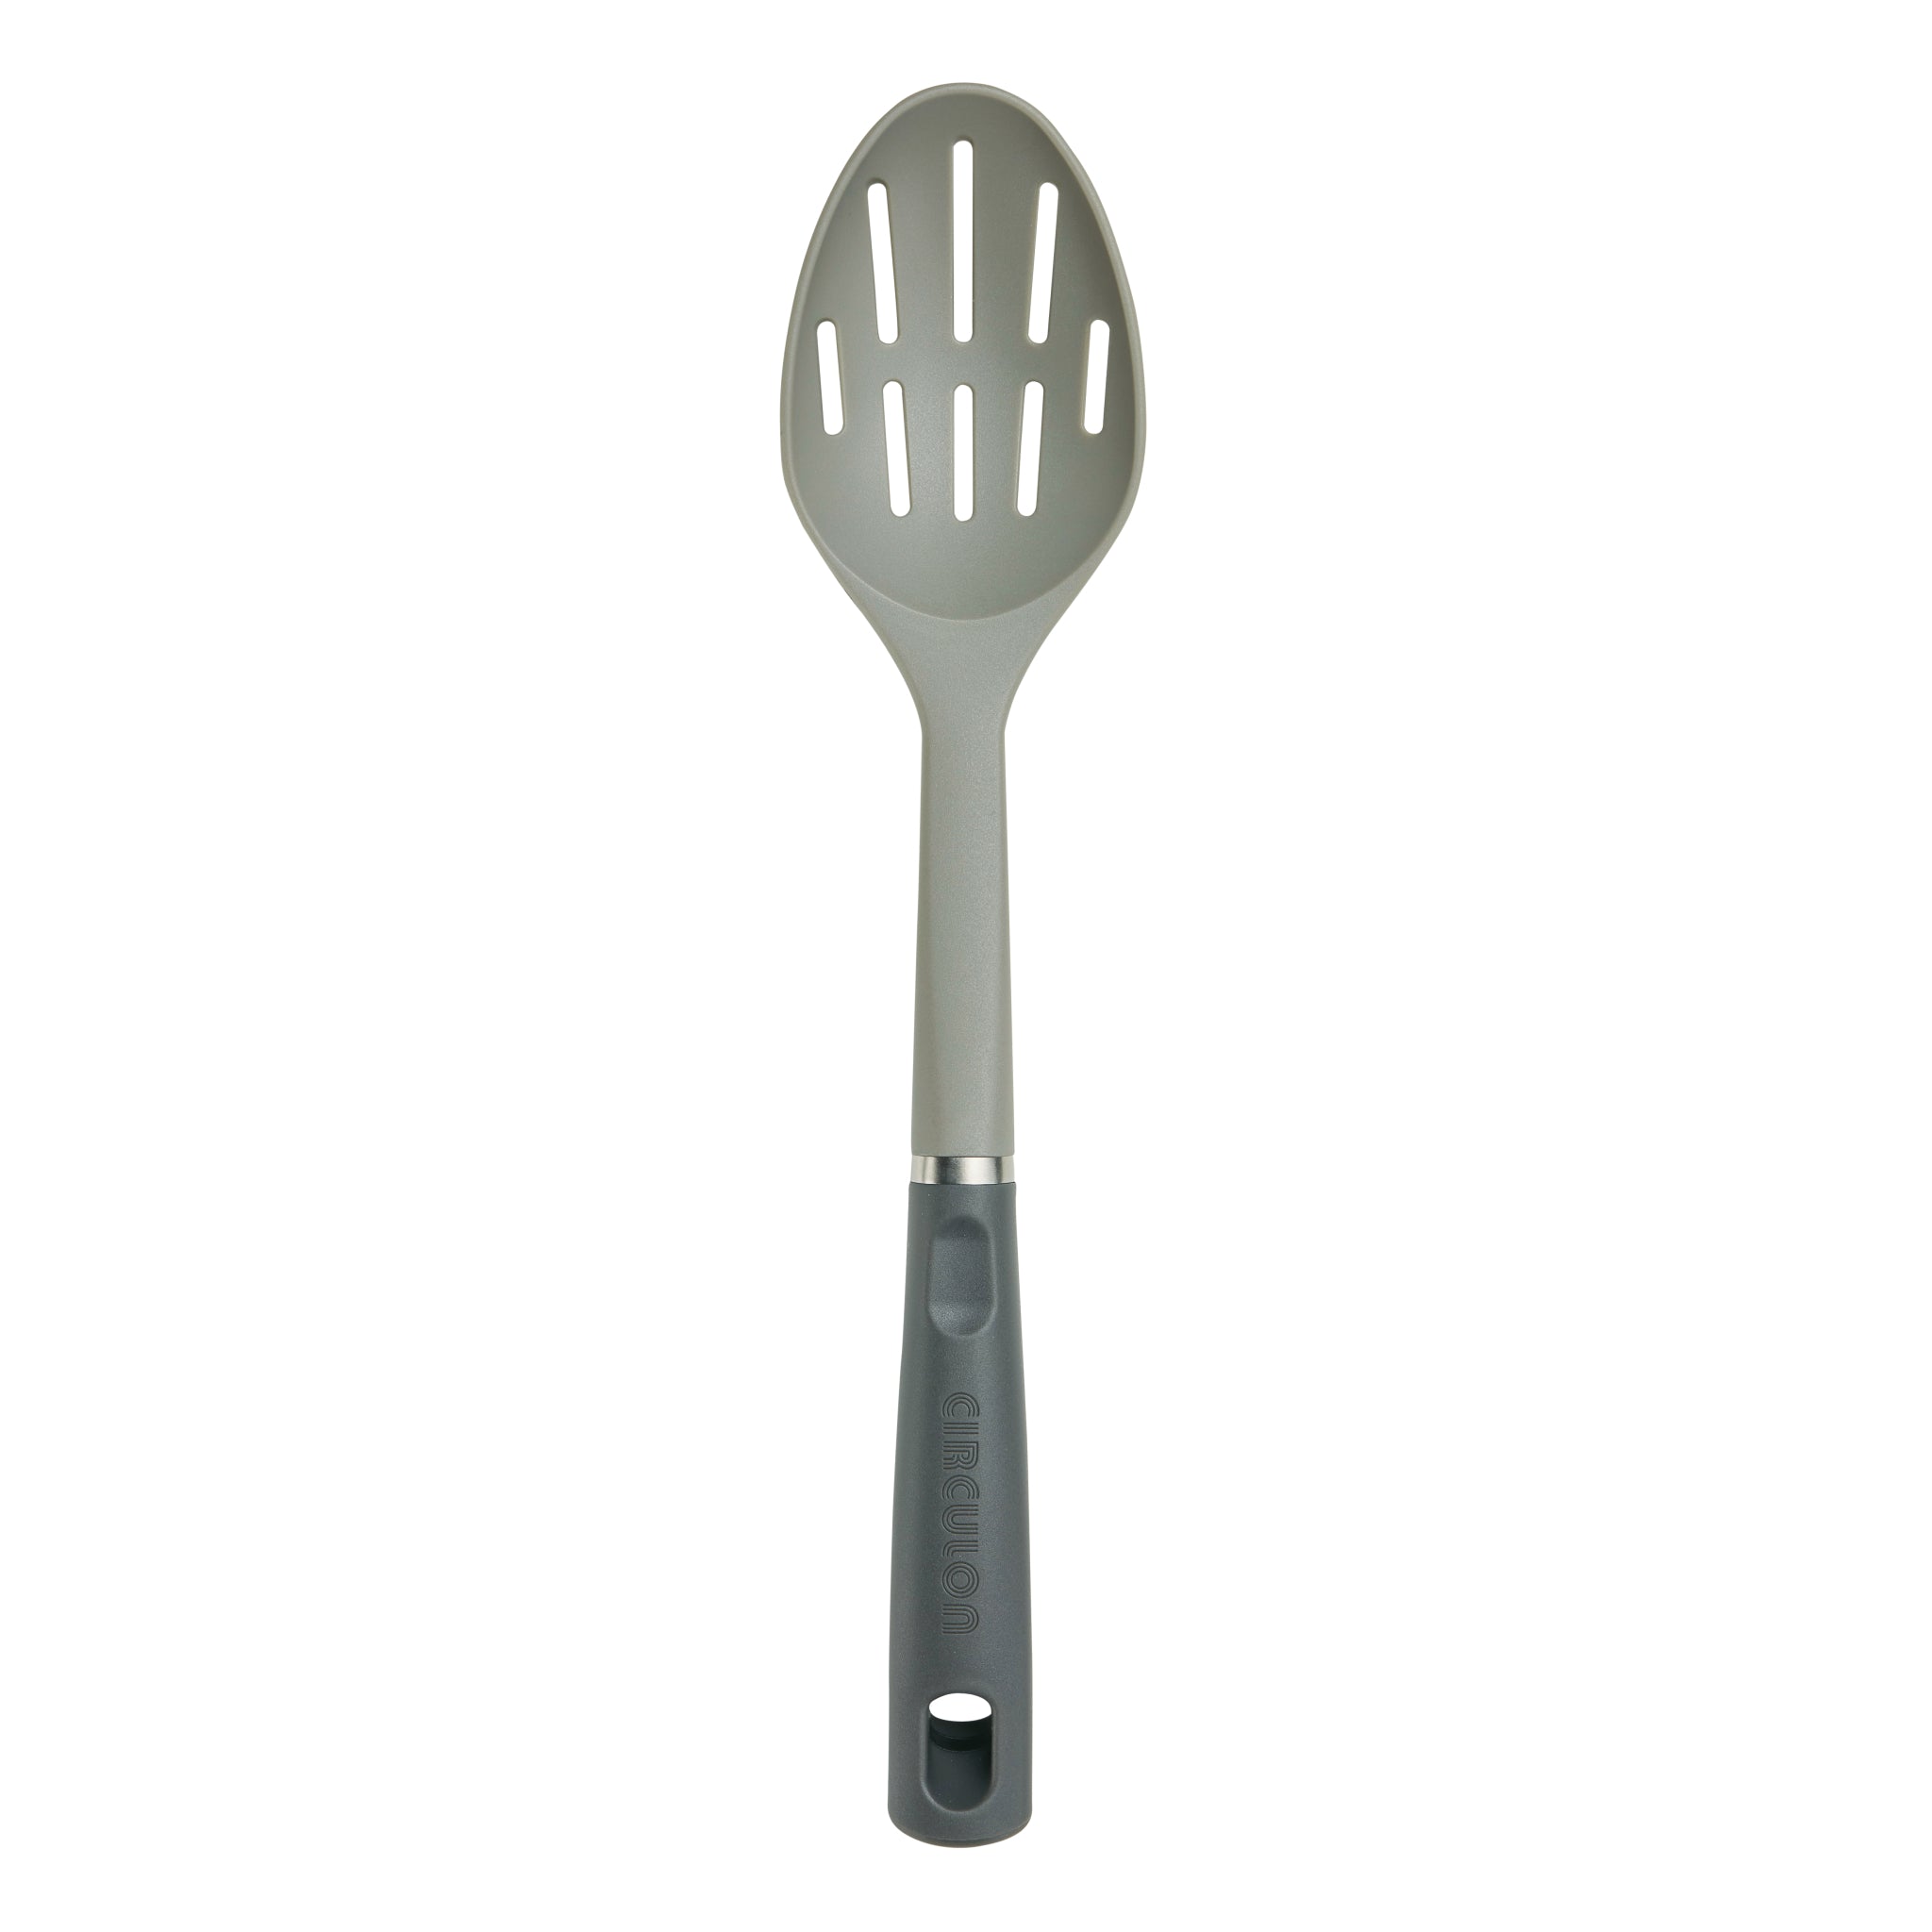 McCormick Nylon Slotted Spoons - 13.125 x 2.625 x 2.5 in